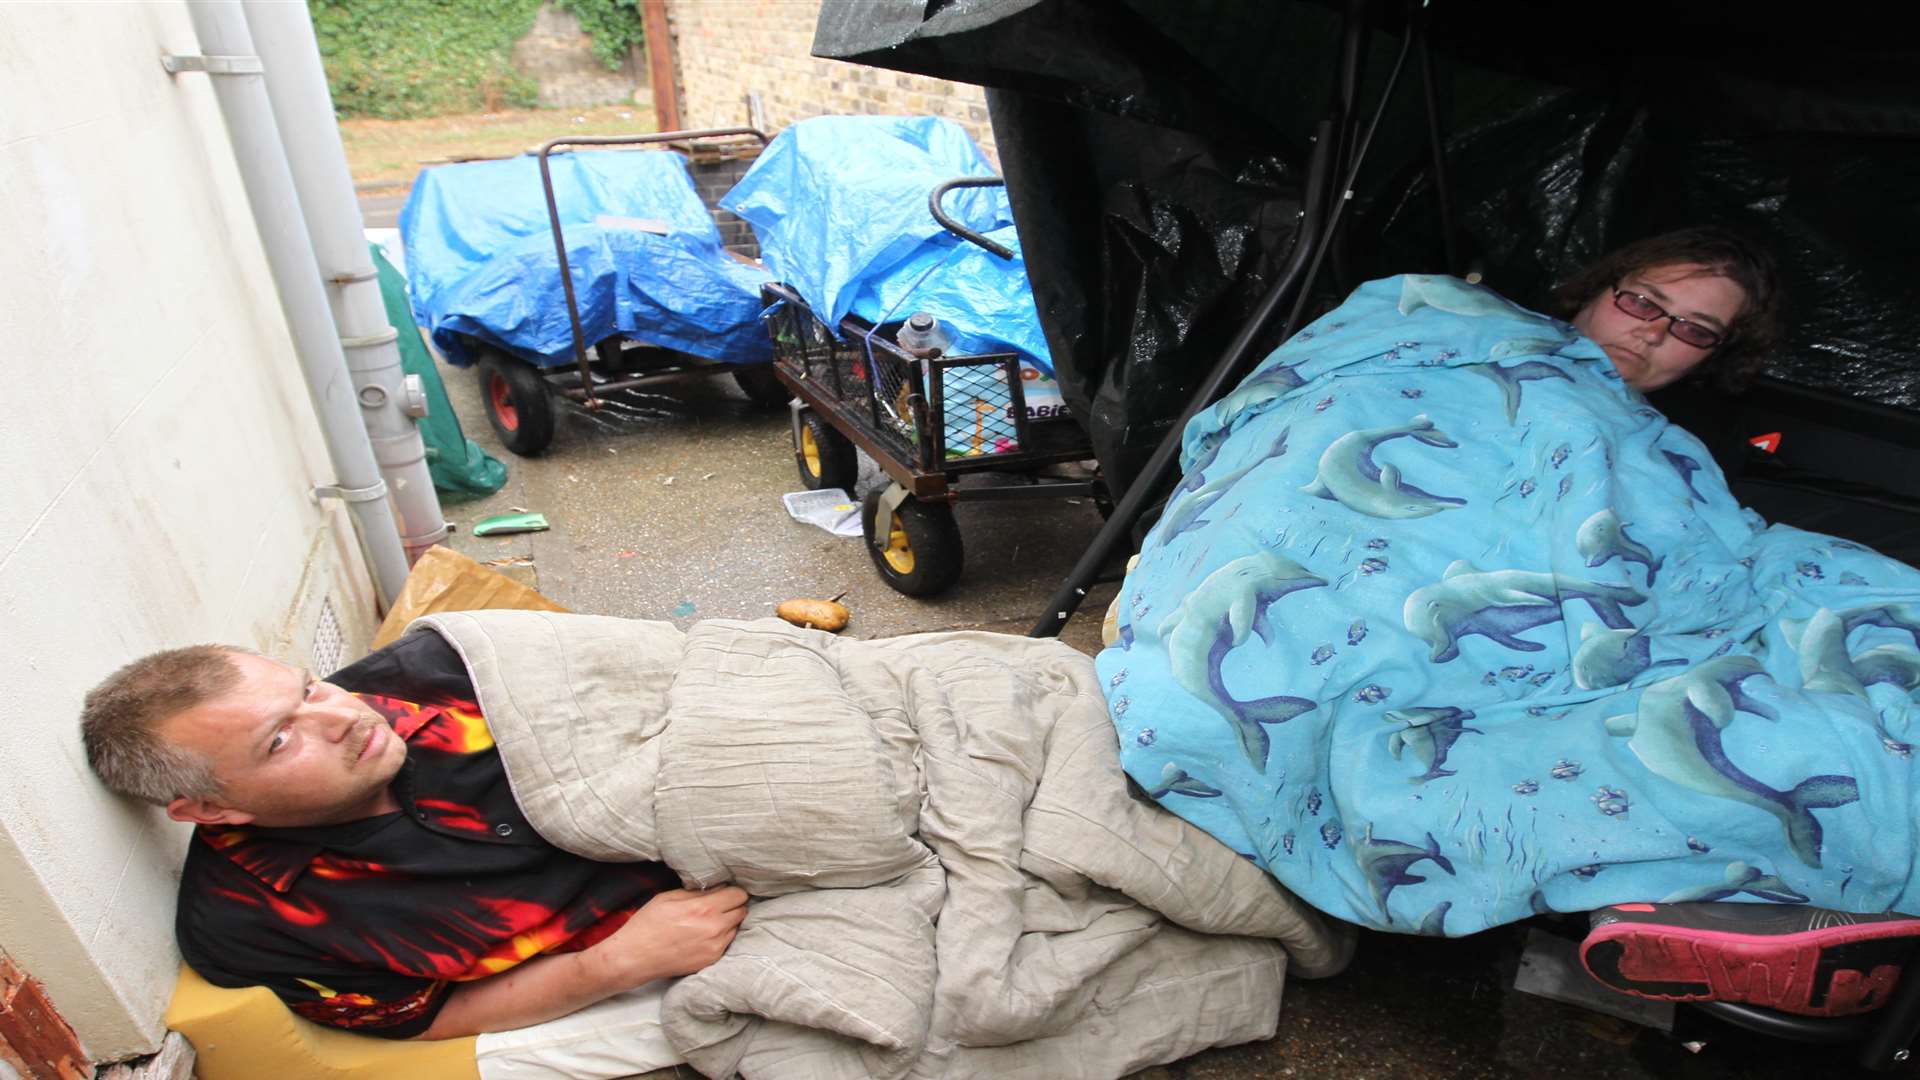 Paul Sargeant and his partner, Marina Wilks sleep outside to guard their property